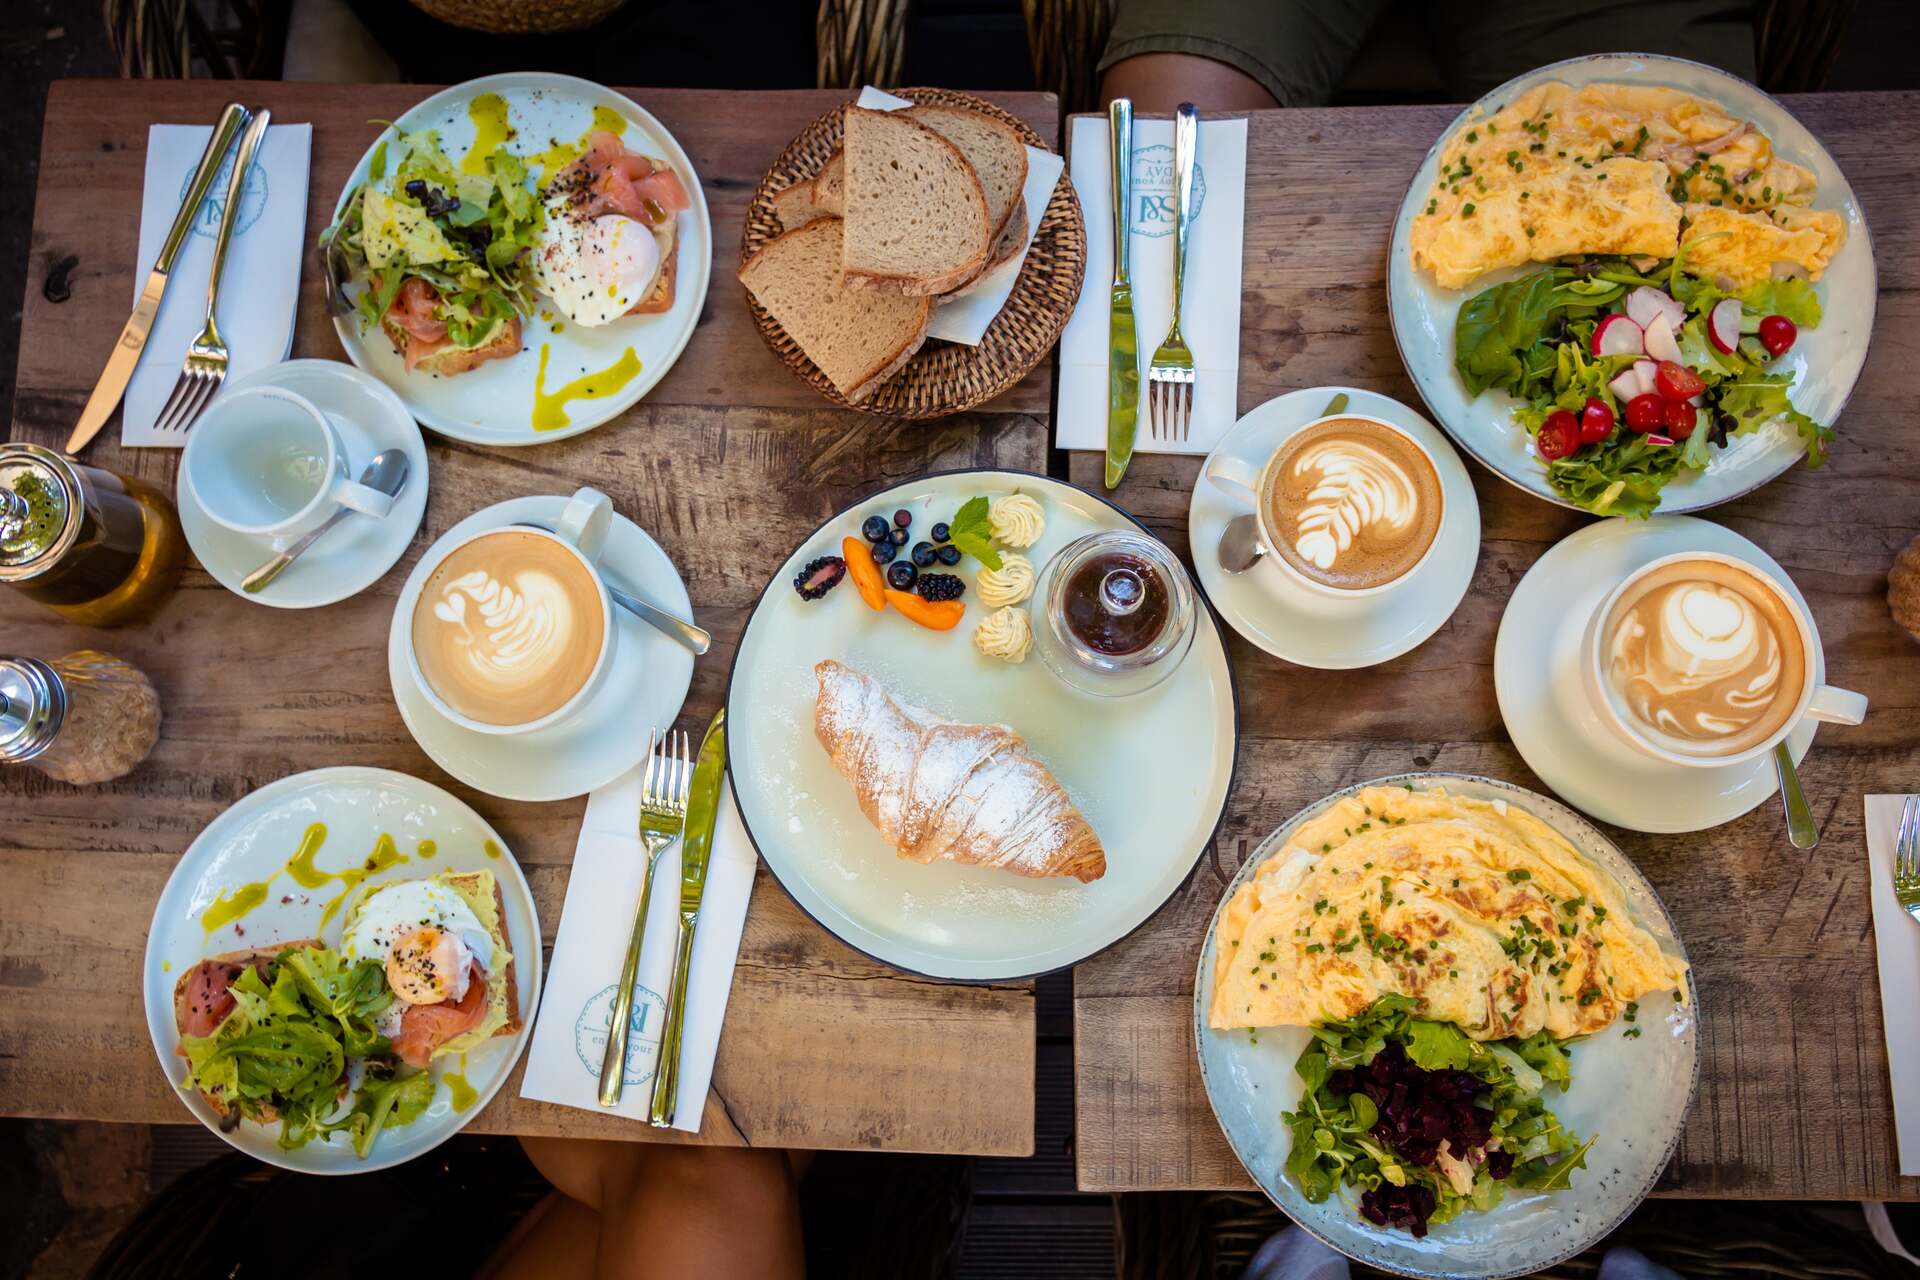 Table full of breakfast options such as omelet and croissant